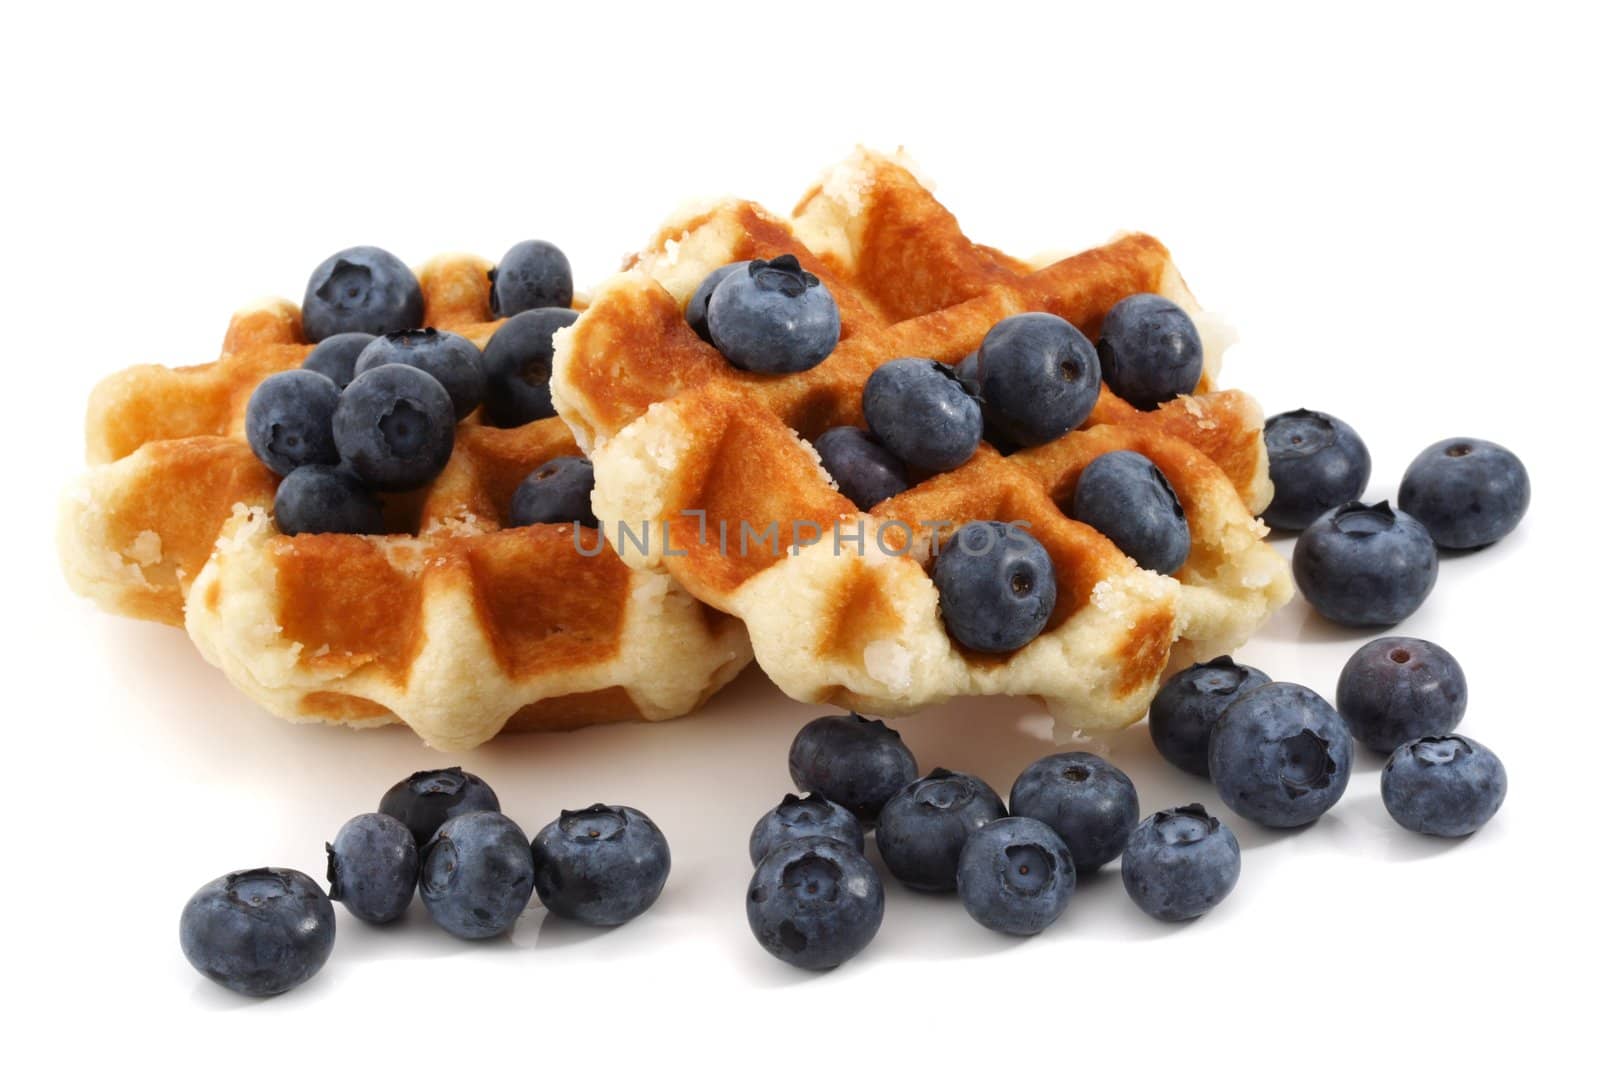 two belgian waffles and fresh blueberries, white background